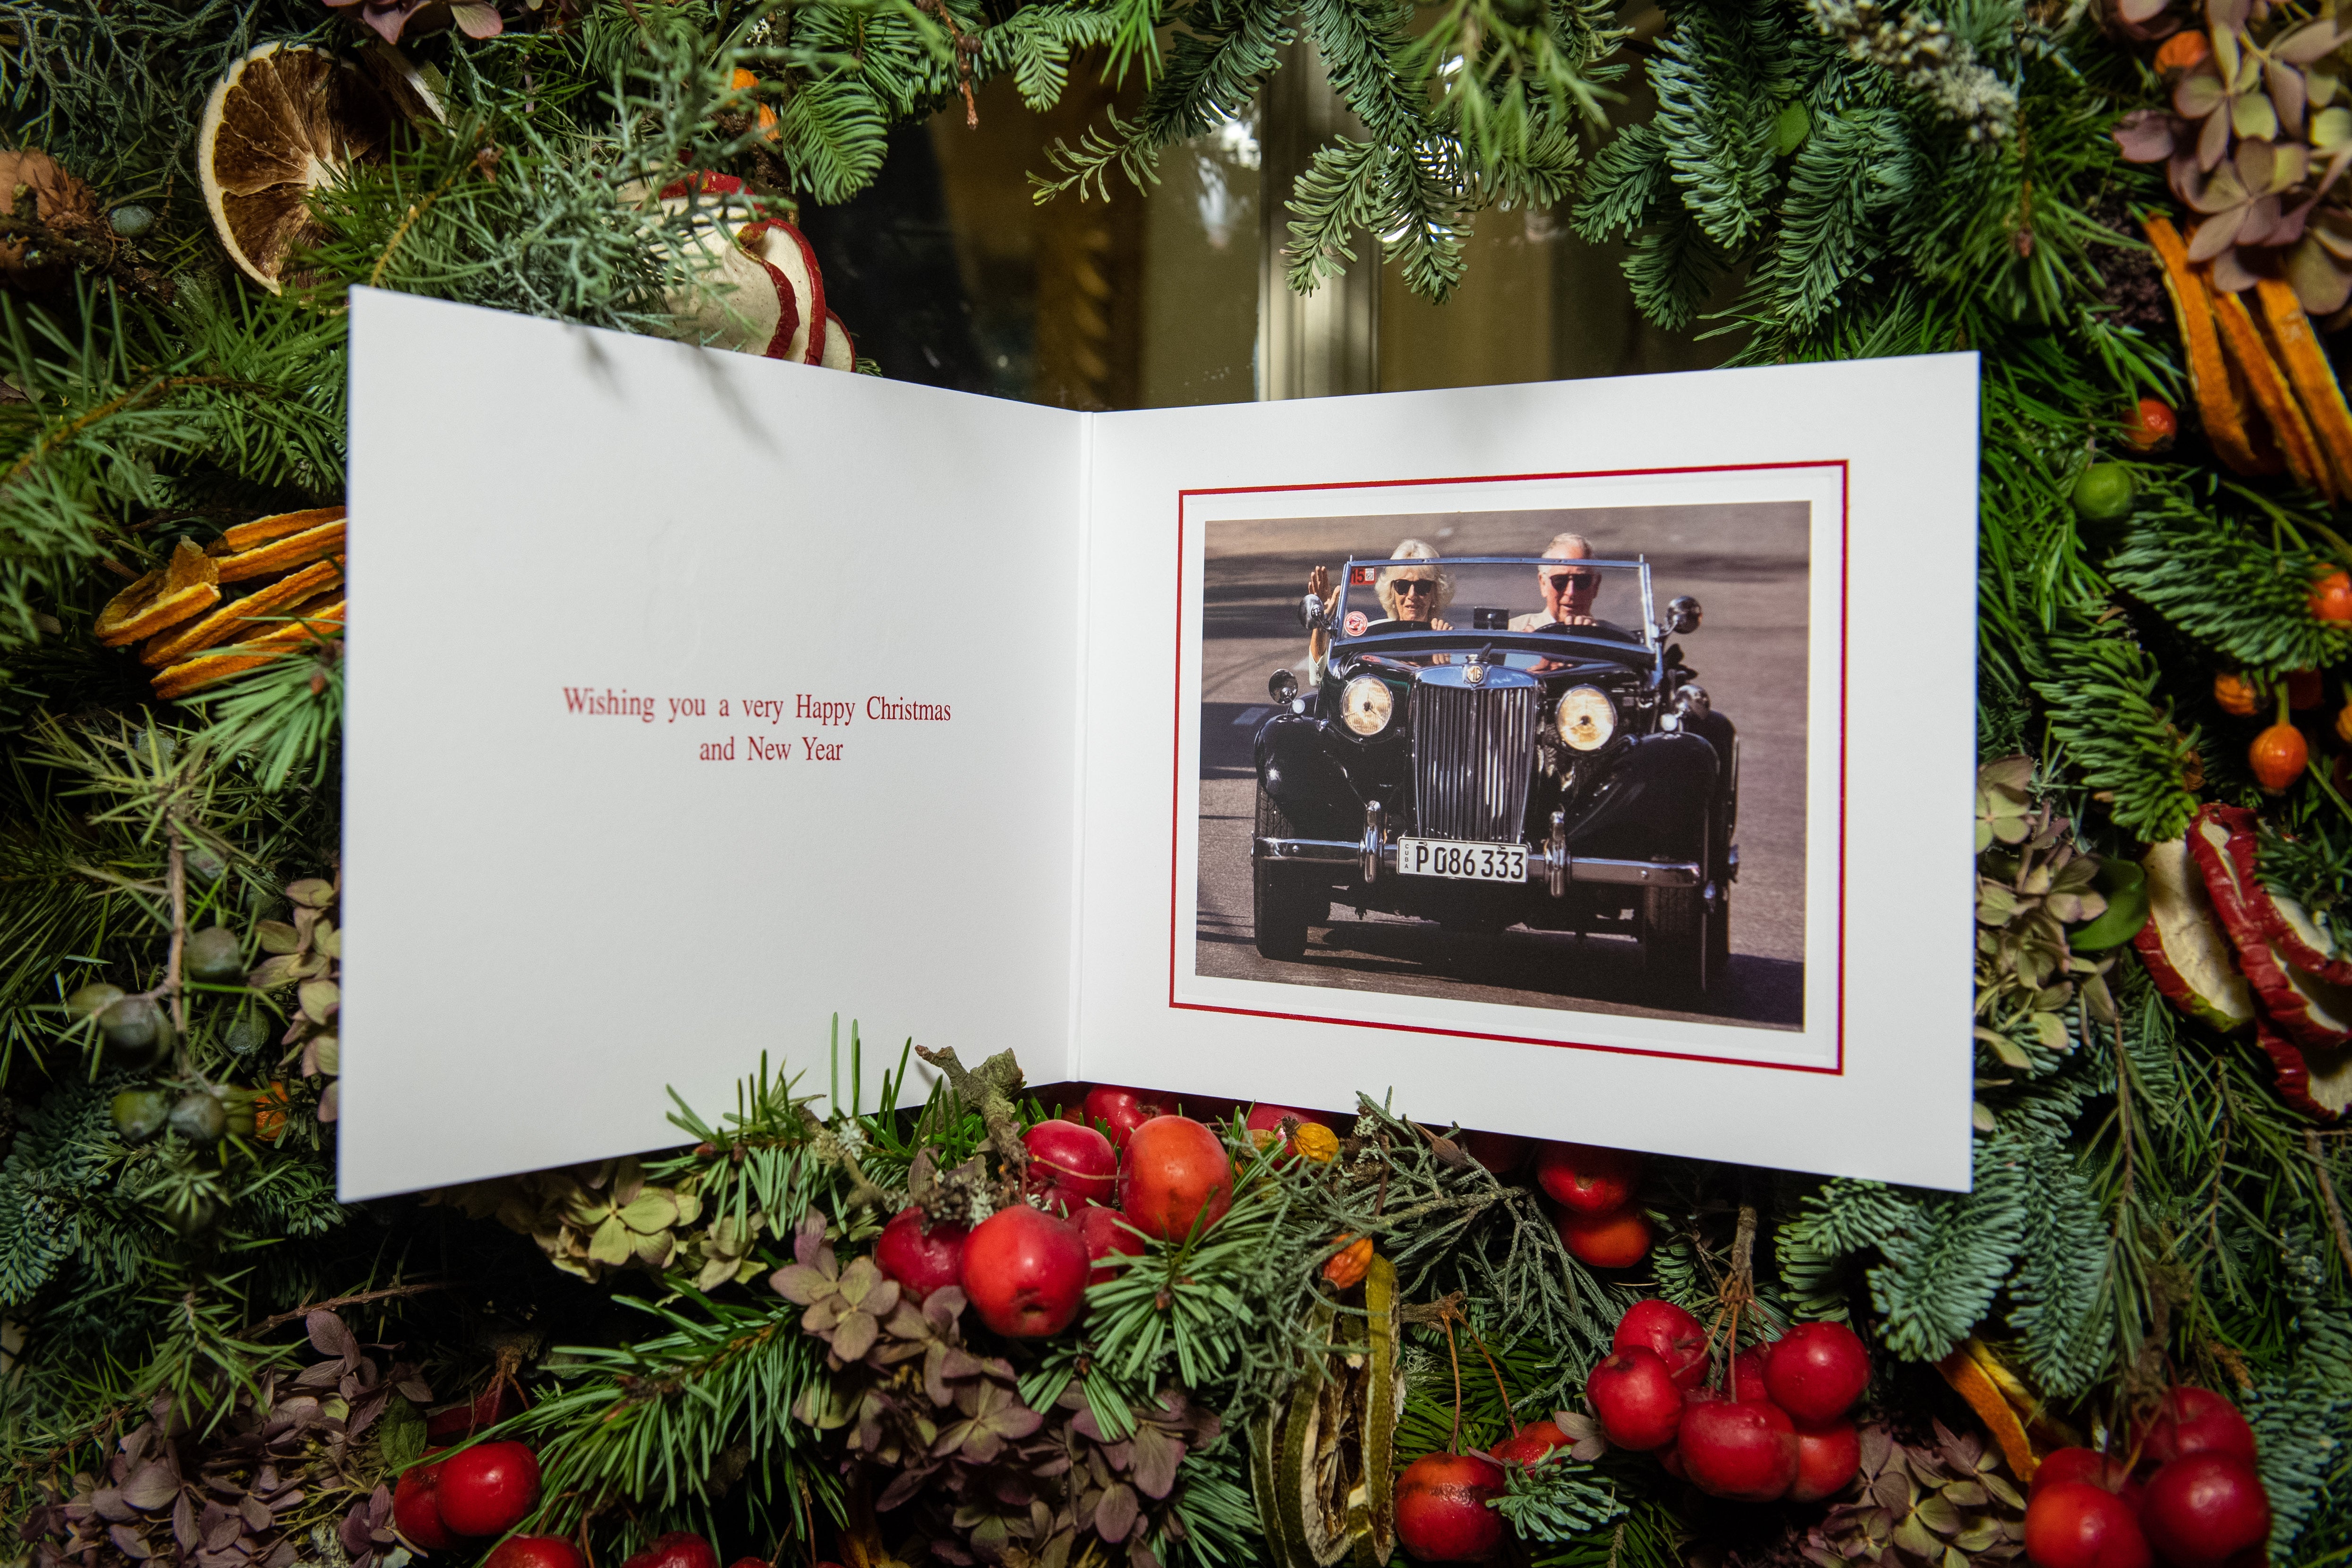 The 2019 Christmas card of Prince Charles and Camilla featuring a photograph of the royal couple driving a vintage MG TD whilst on tour in Cuba